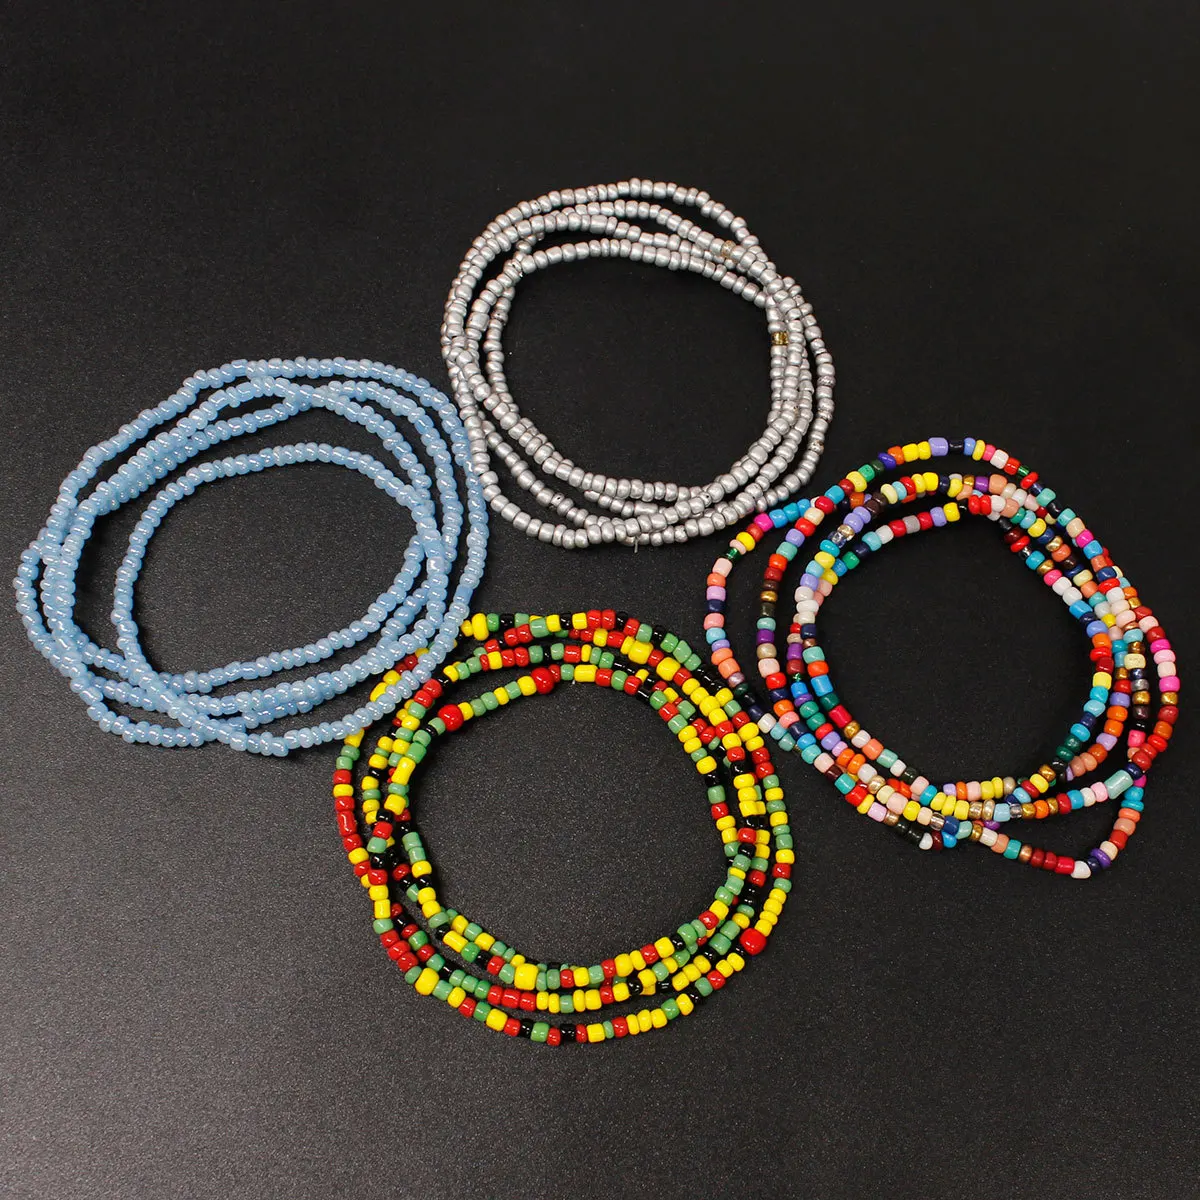 

4 Pcs/ Set Colored Beads Multi-layer Beach Anklet Women Summer Fashion Long Chain Ankle Bracelets Foot Accessories